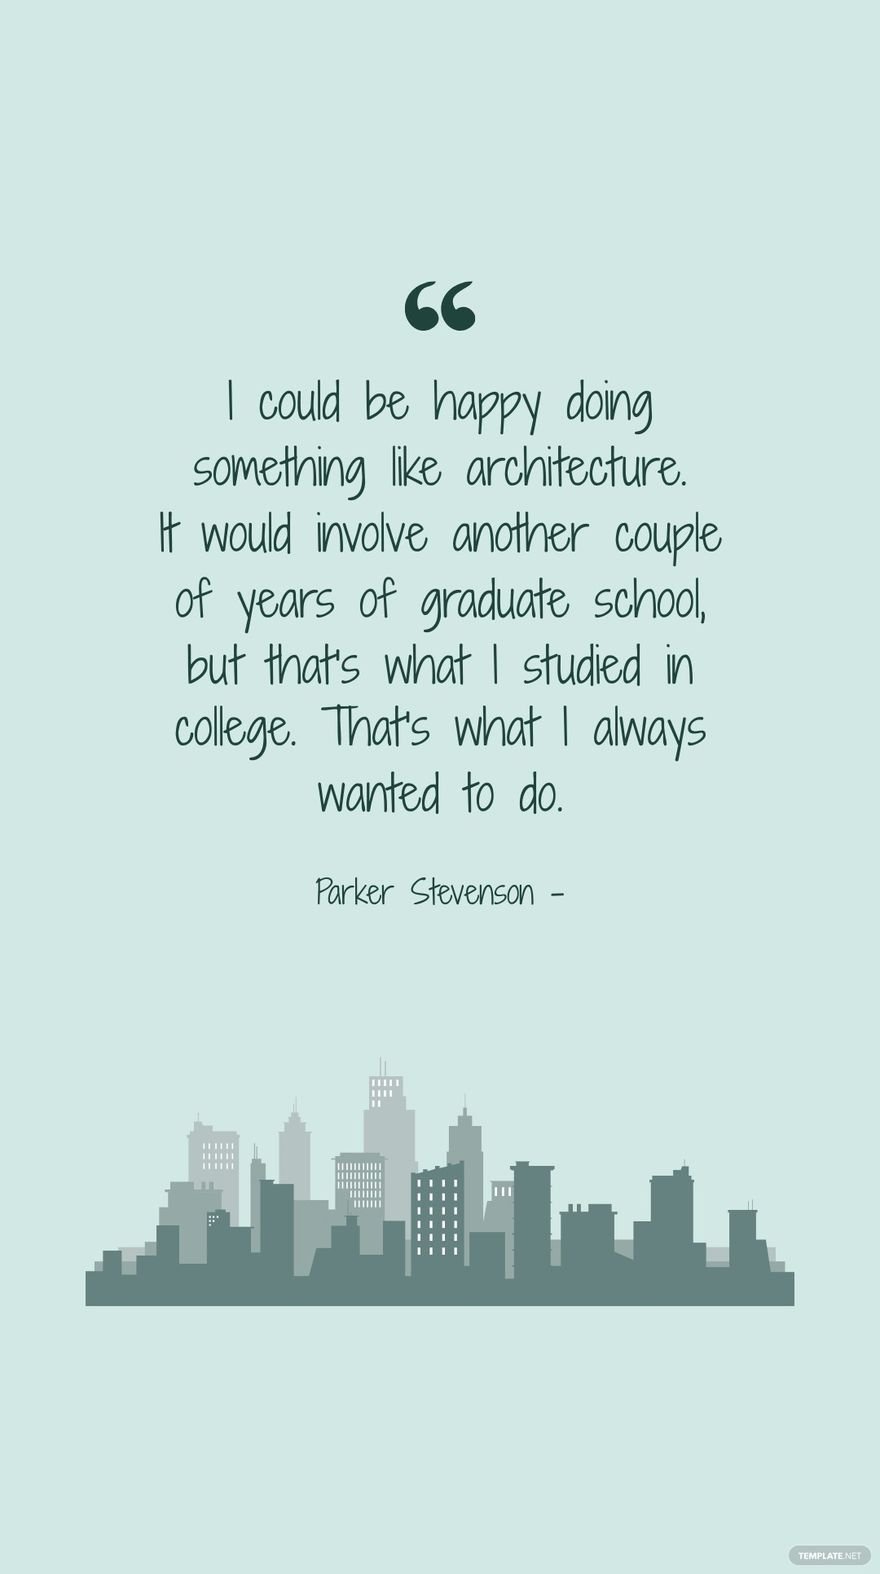 Free Parker Stevenson - I could be happy doing something like architecture. It would involve another couple of years of graduate school, but that's what I studied in college. That's what I always wanted to in JPG